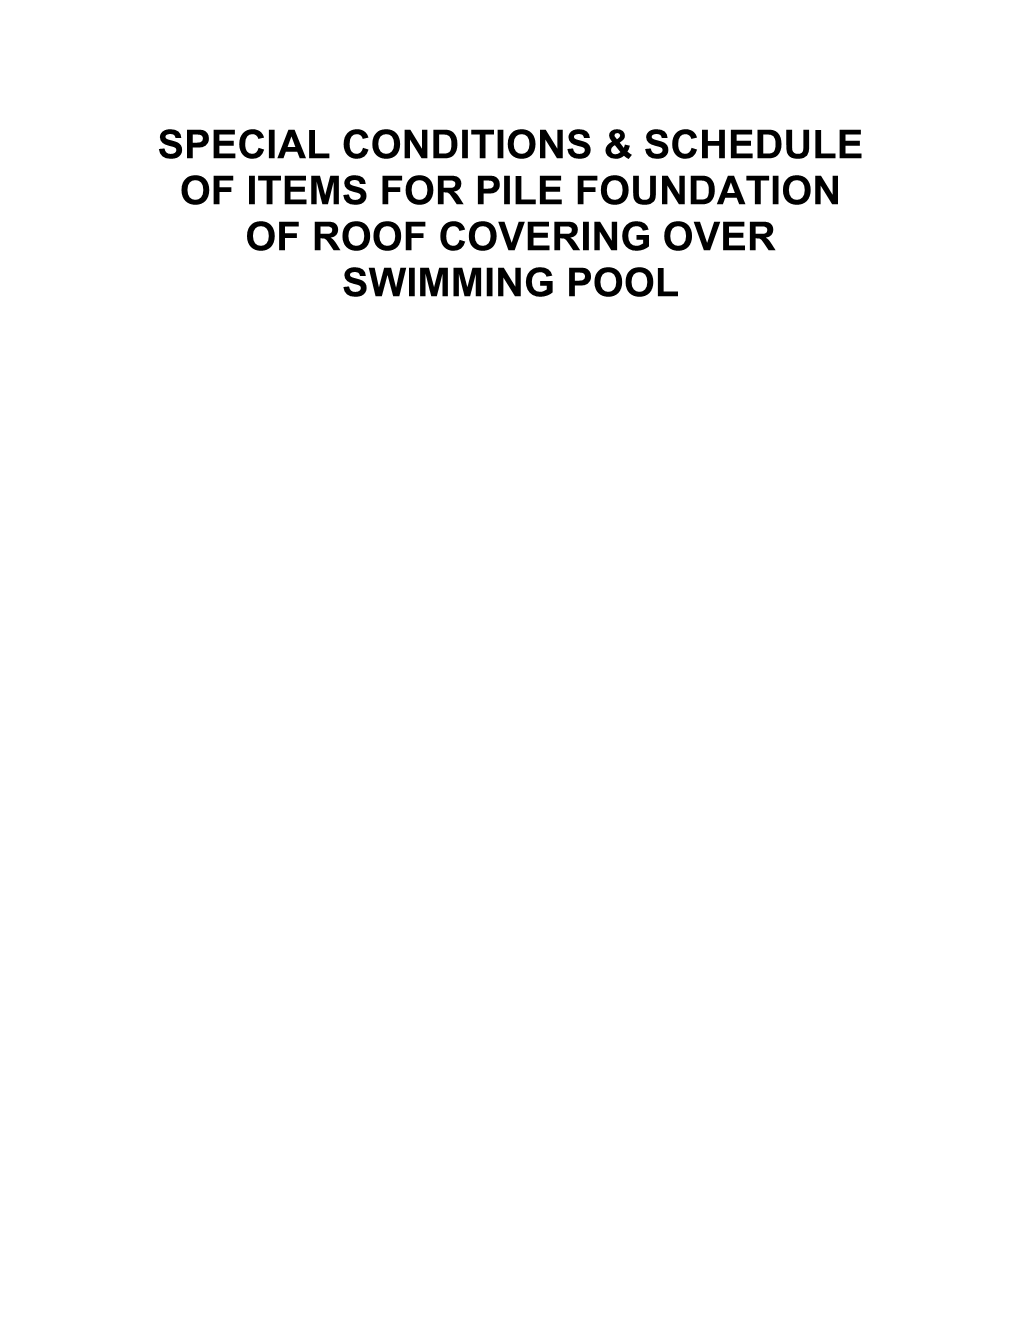 Special Conditions & Schedule of Items for Pile Foundation of Roof Covering Over Swimming Pool